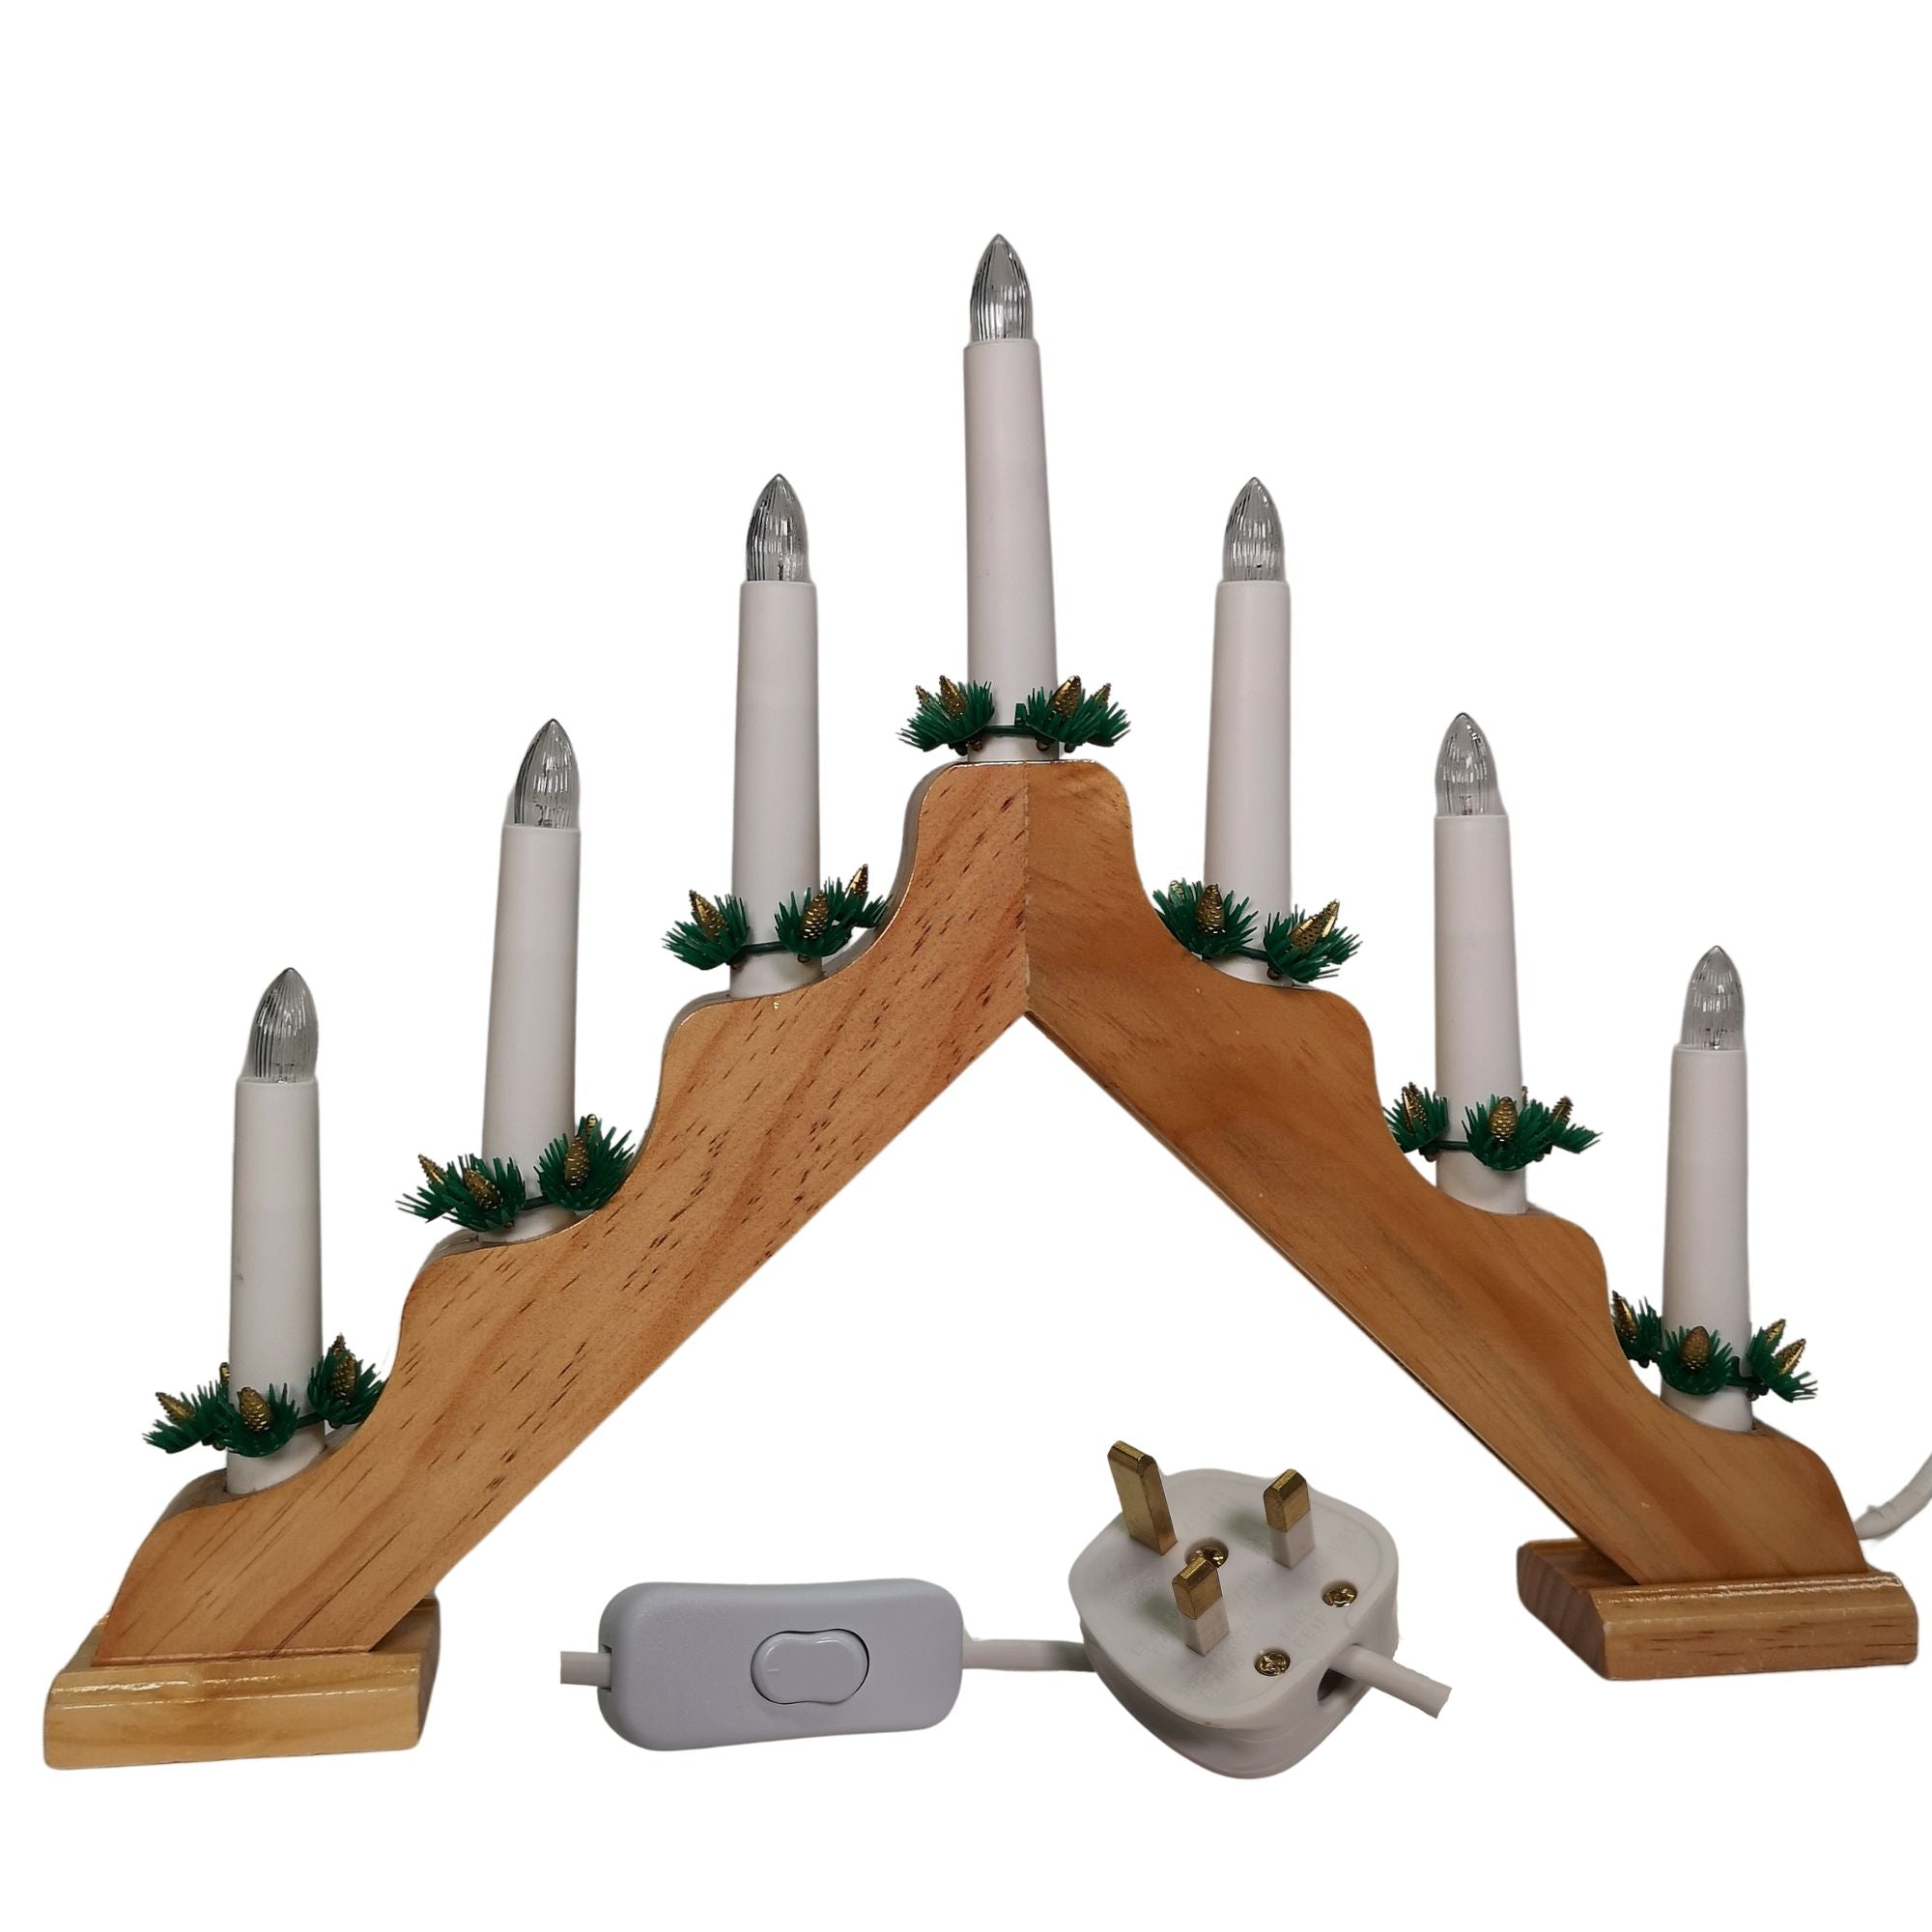 40cm Premier Christmas Candlebridge with 7 Clear Bulb V Shaped in Light Wood  Mains Powered